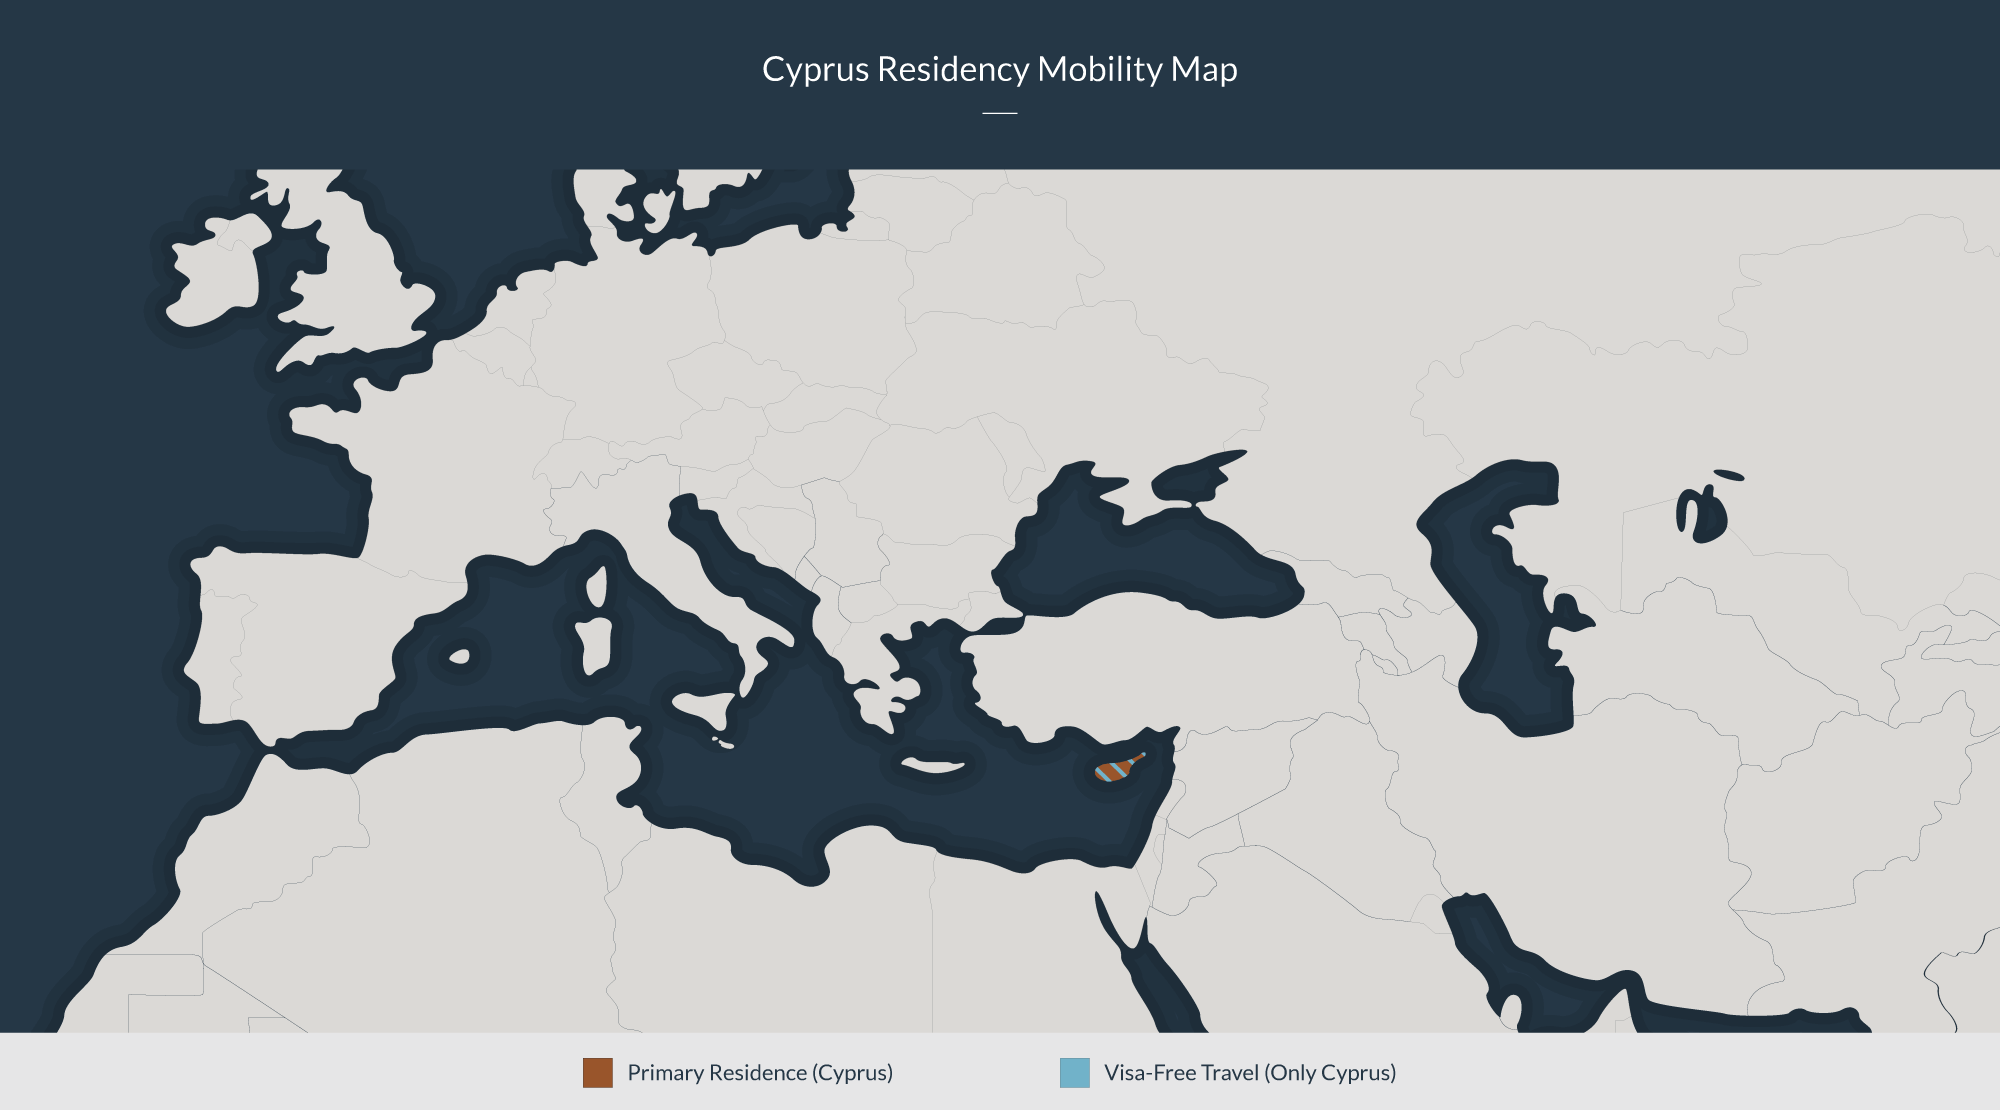 Cyprus residency mobility map: Primary residence in Cyprus and visa-free travel to Cyprus.